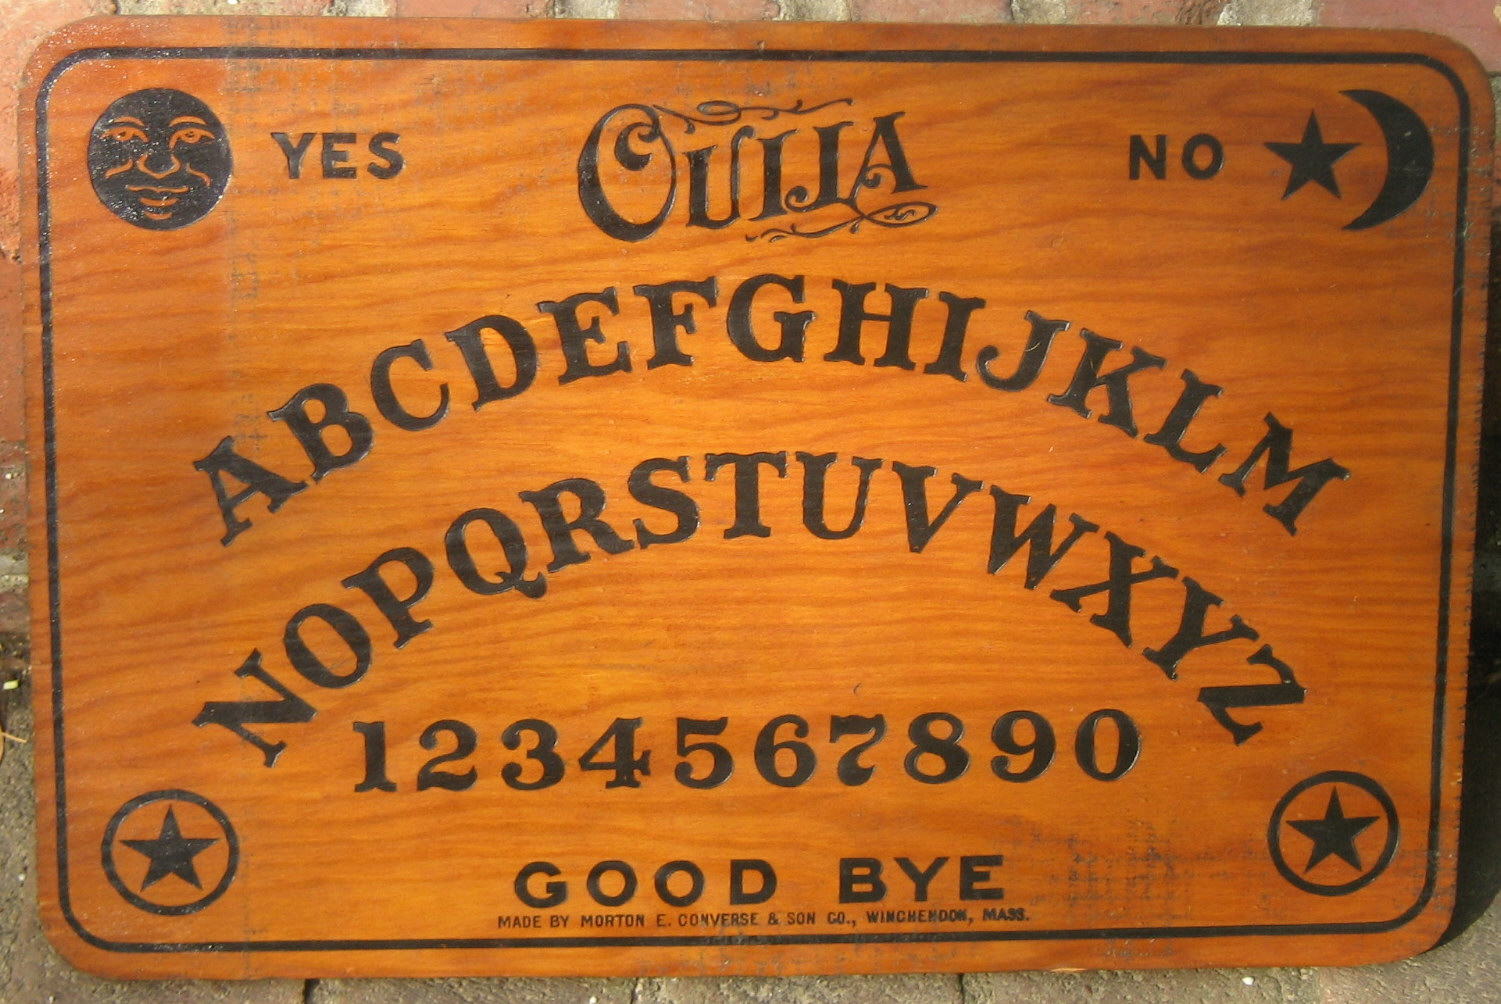 The origin and history of the ouija board